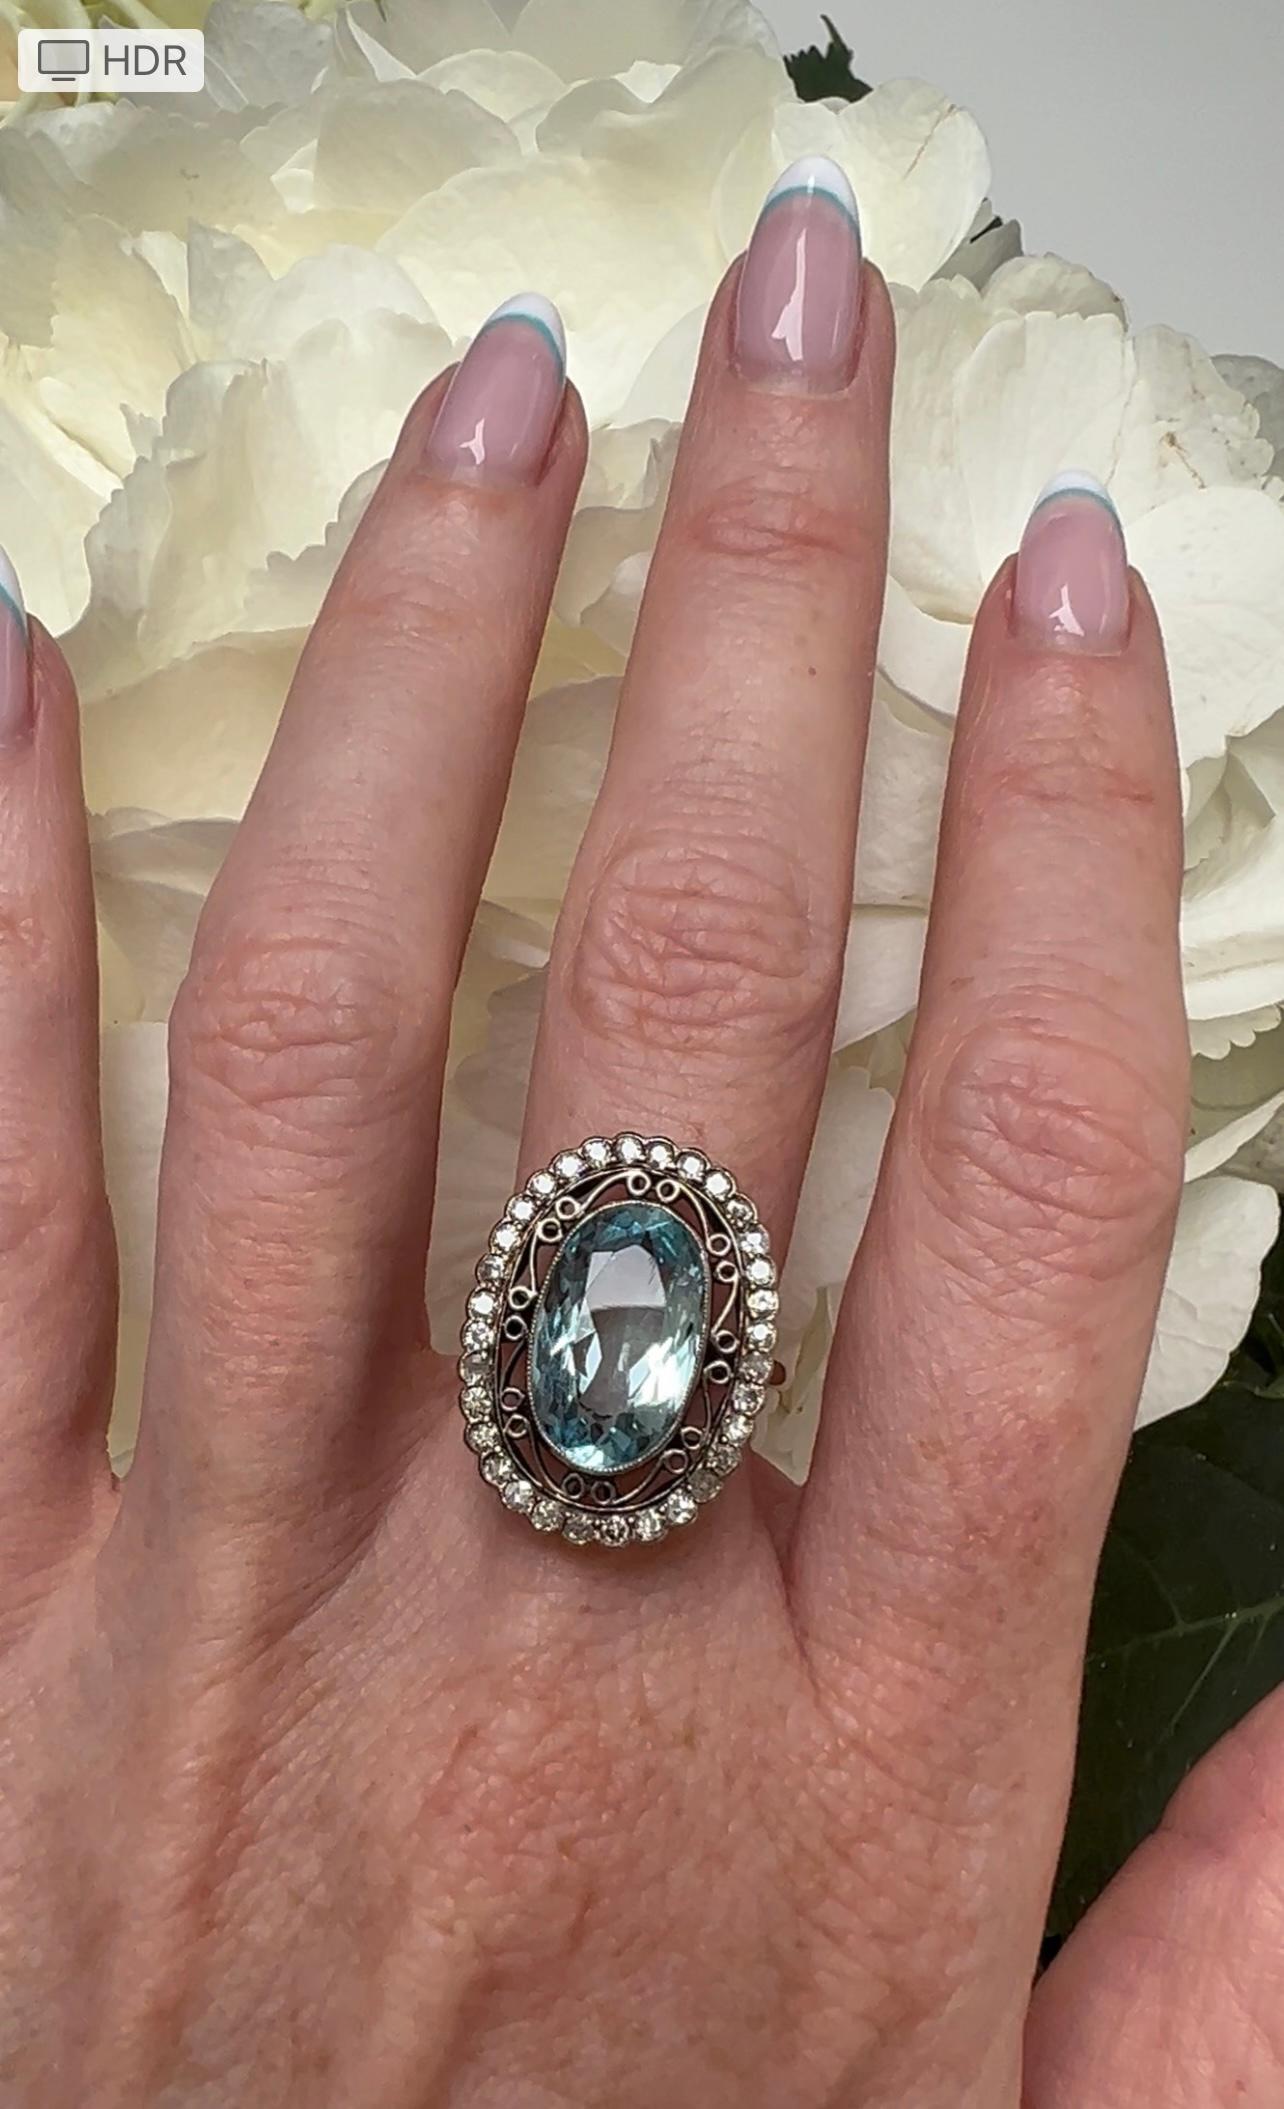 Edwardian oval aquamarine and diamond ring. Aquamarine measures 14x8.5mm, Approx 3cts surrounded by old cut diamonds, Approx 0.35cts, set in 18ct gold. Size 6.25/M.5 but can be resized. 